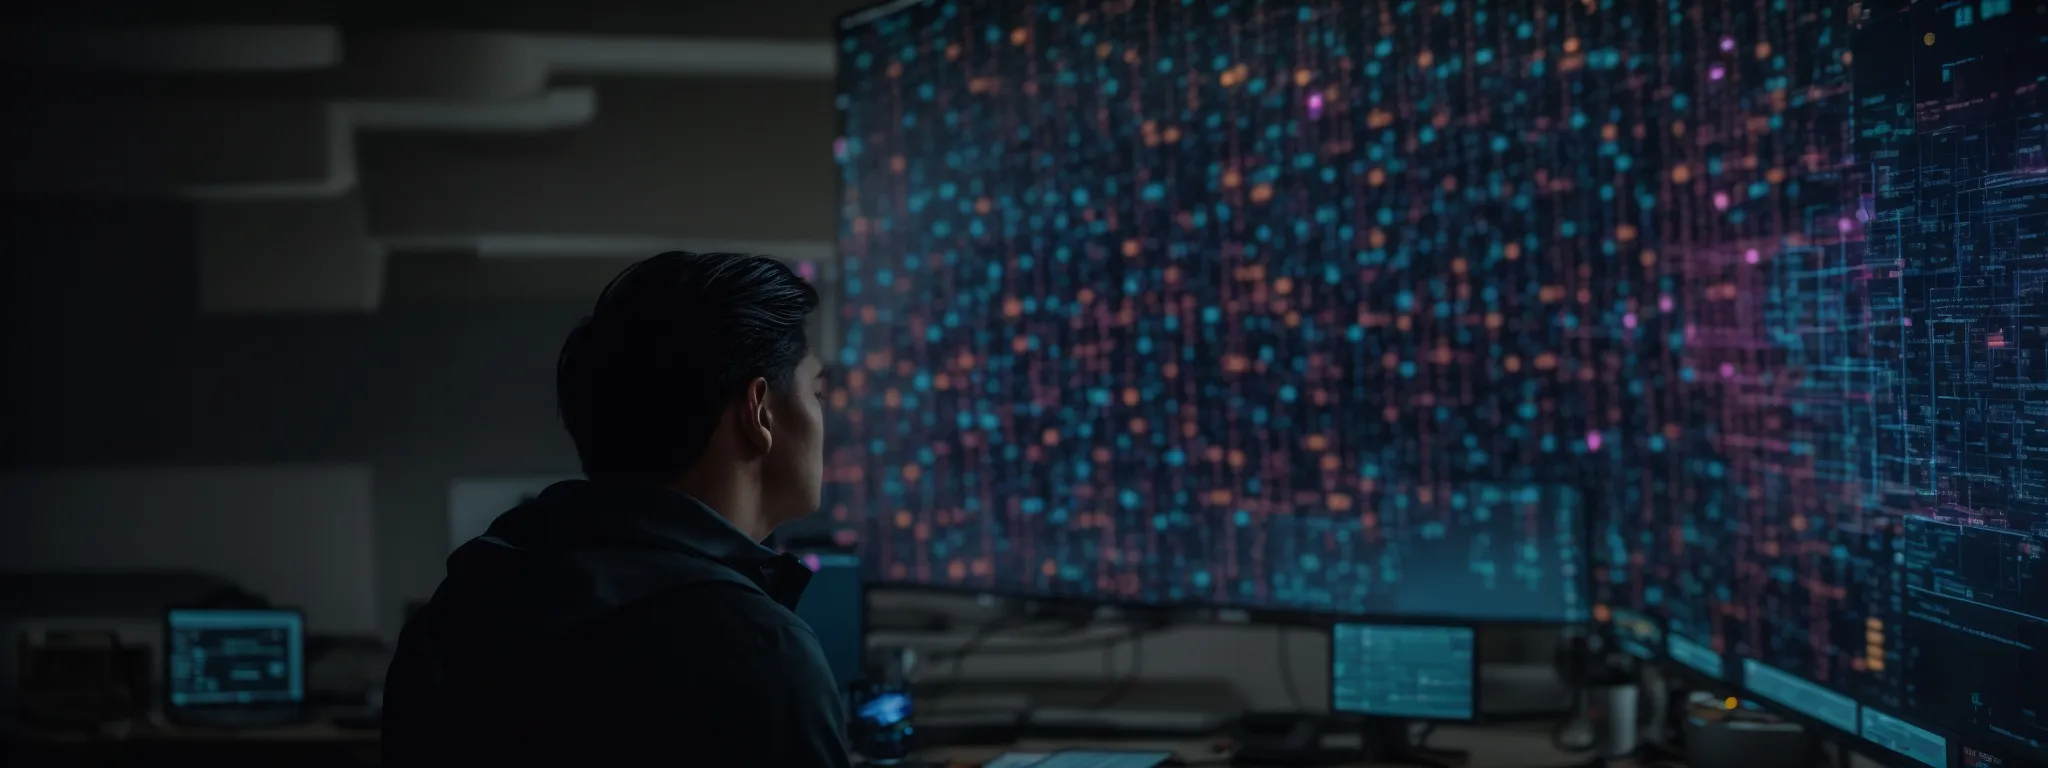 a strategist gazes intently at a vibrant computer screen displaying a web of interconnected keywords highlighting paths and nodes signifying high-value search terms.